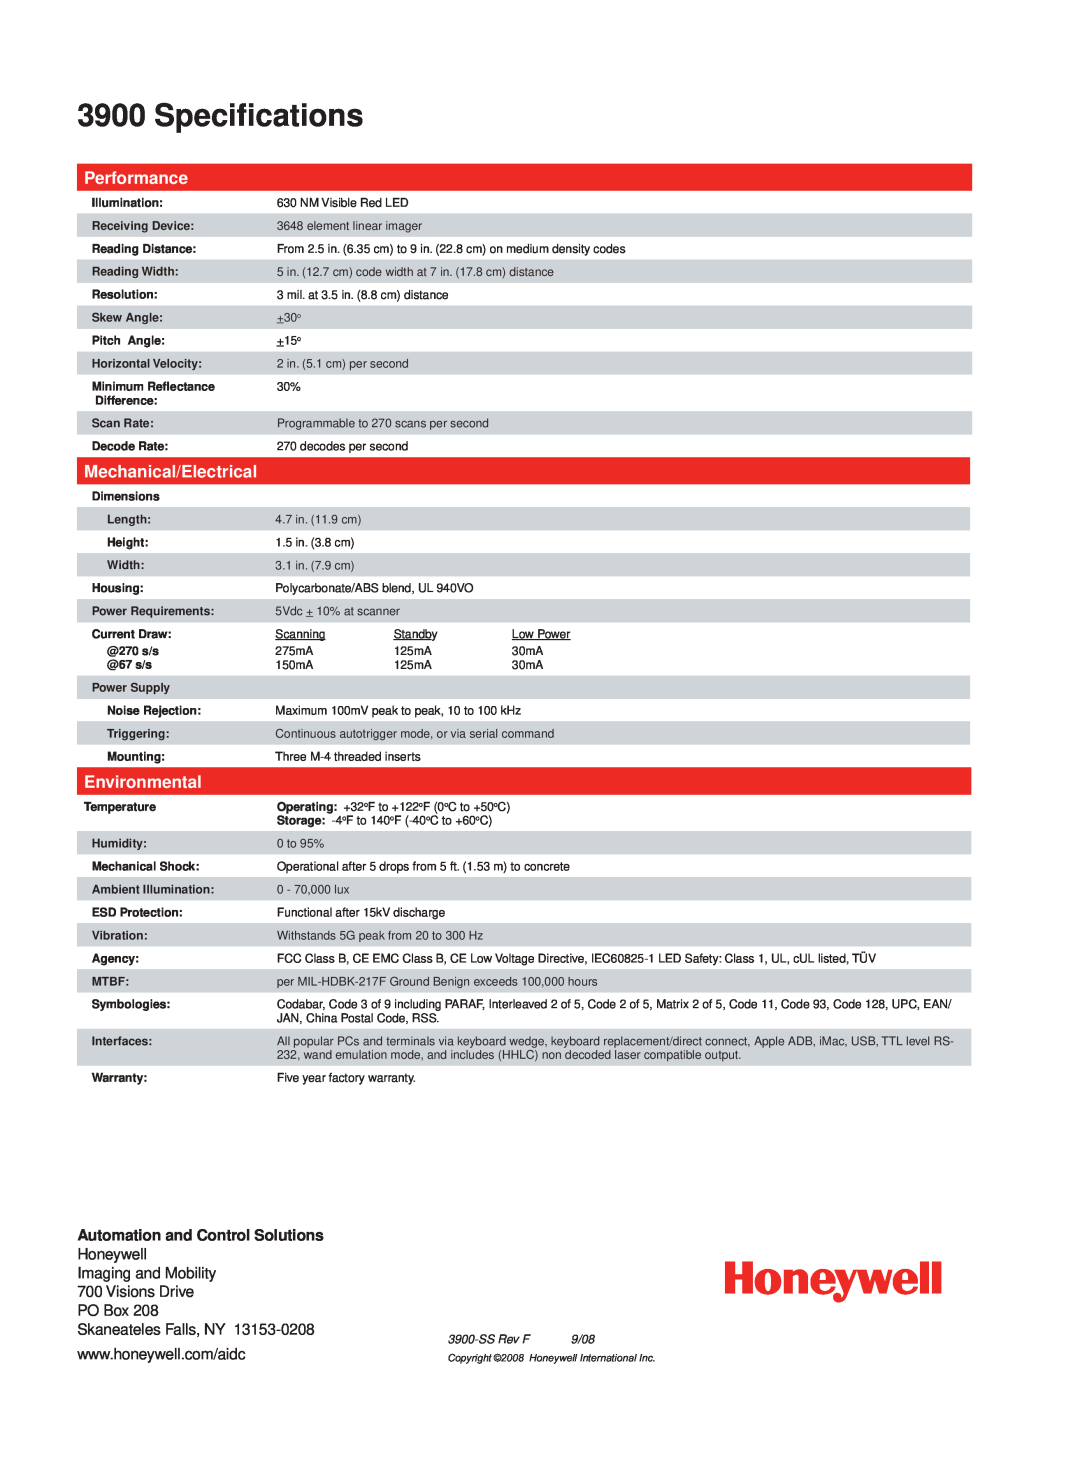 Honeywell 3900 warranty Speciﬁcations, Performance, Mechanical/Electrical, Environmental, 9/08, SS Rev F 